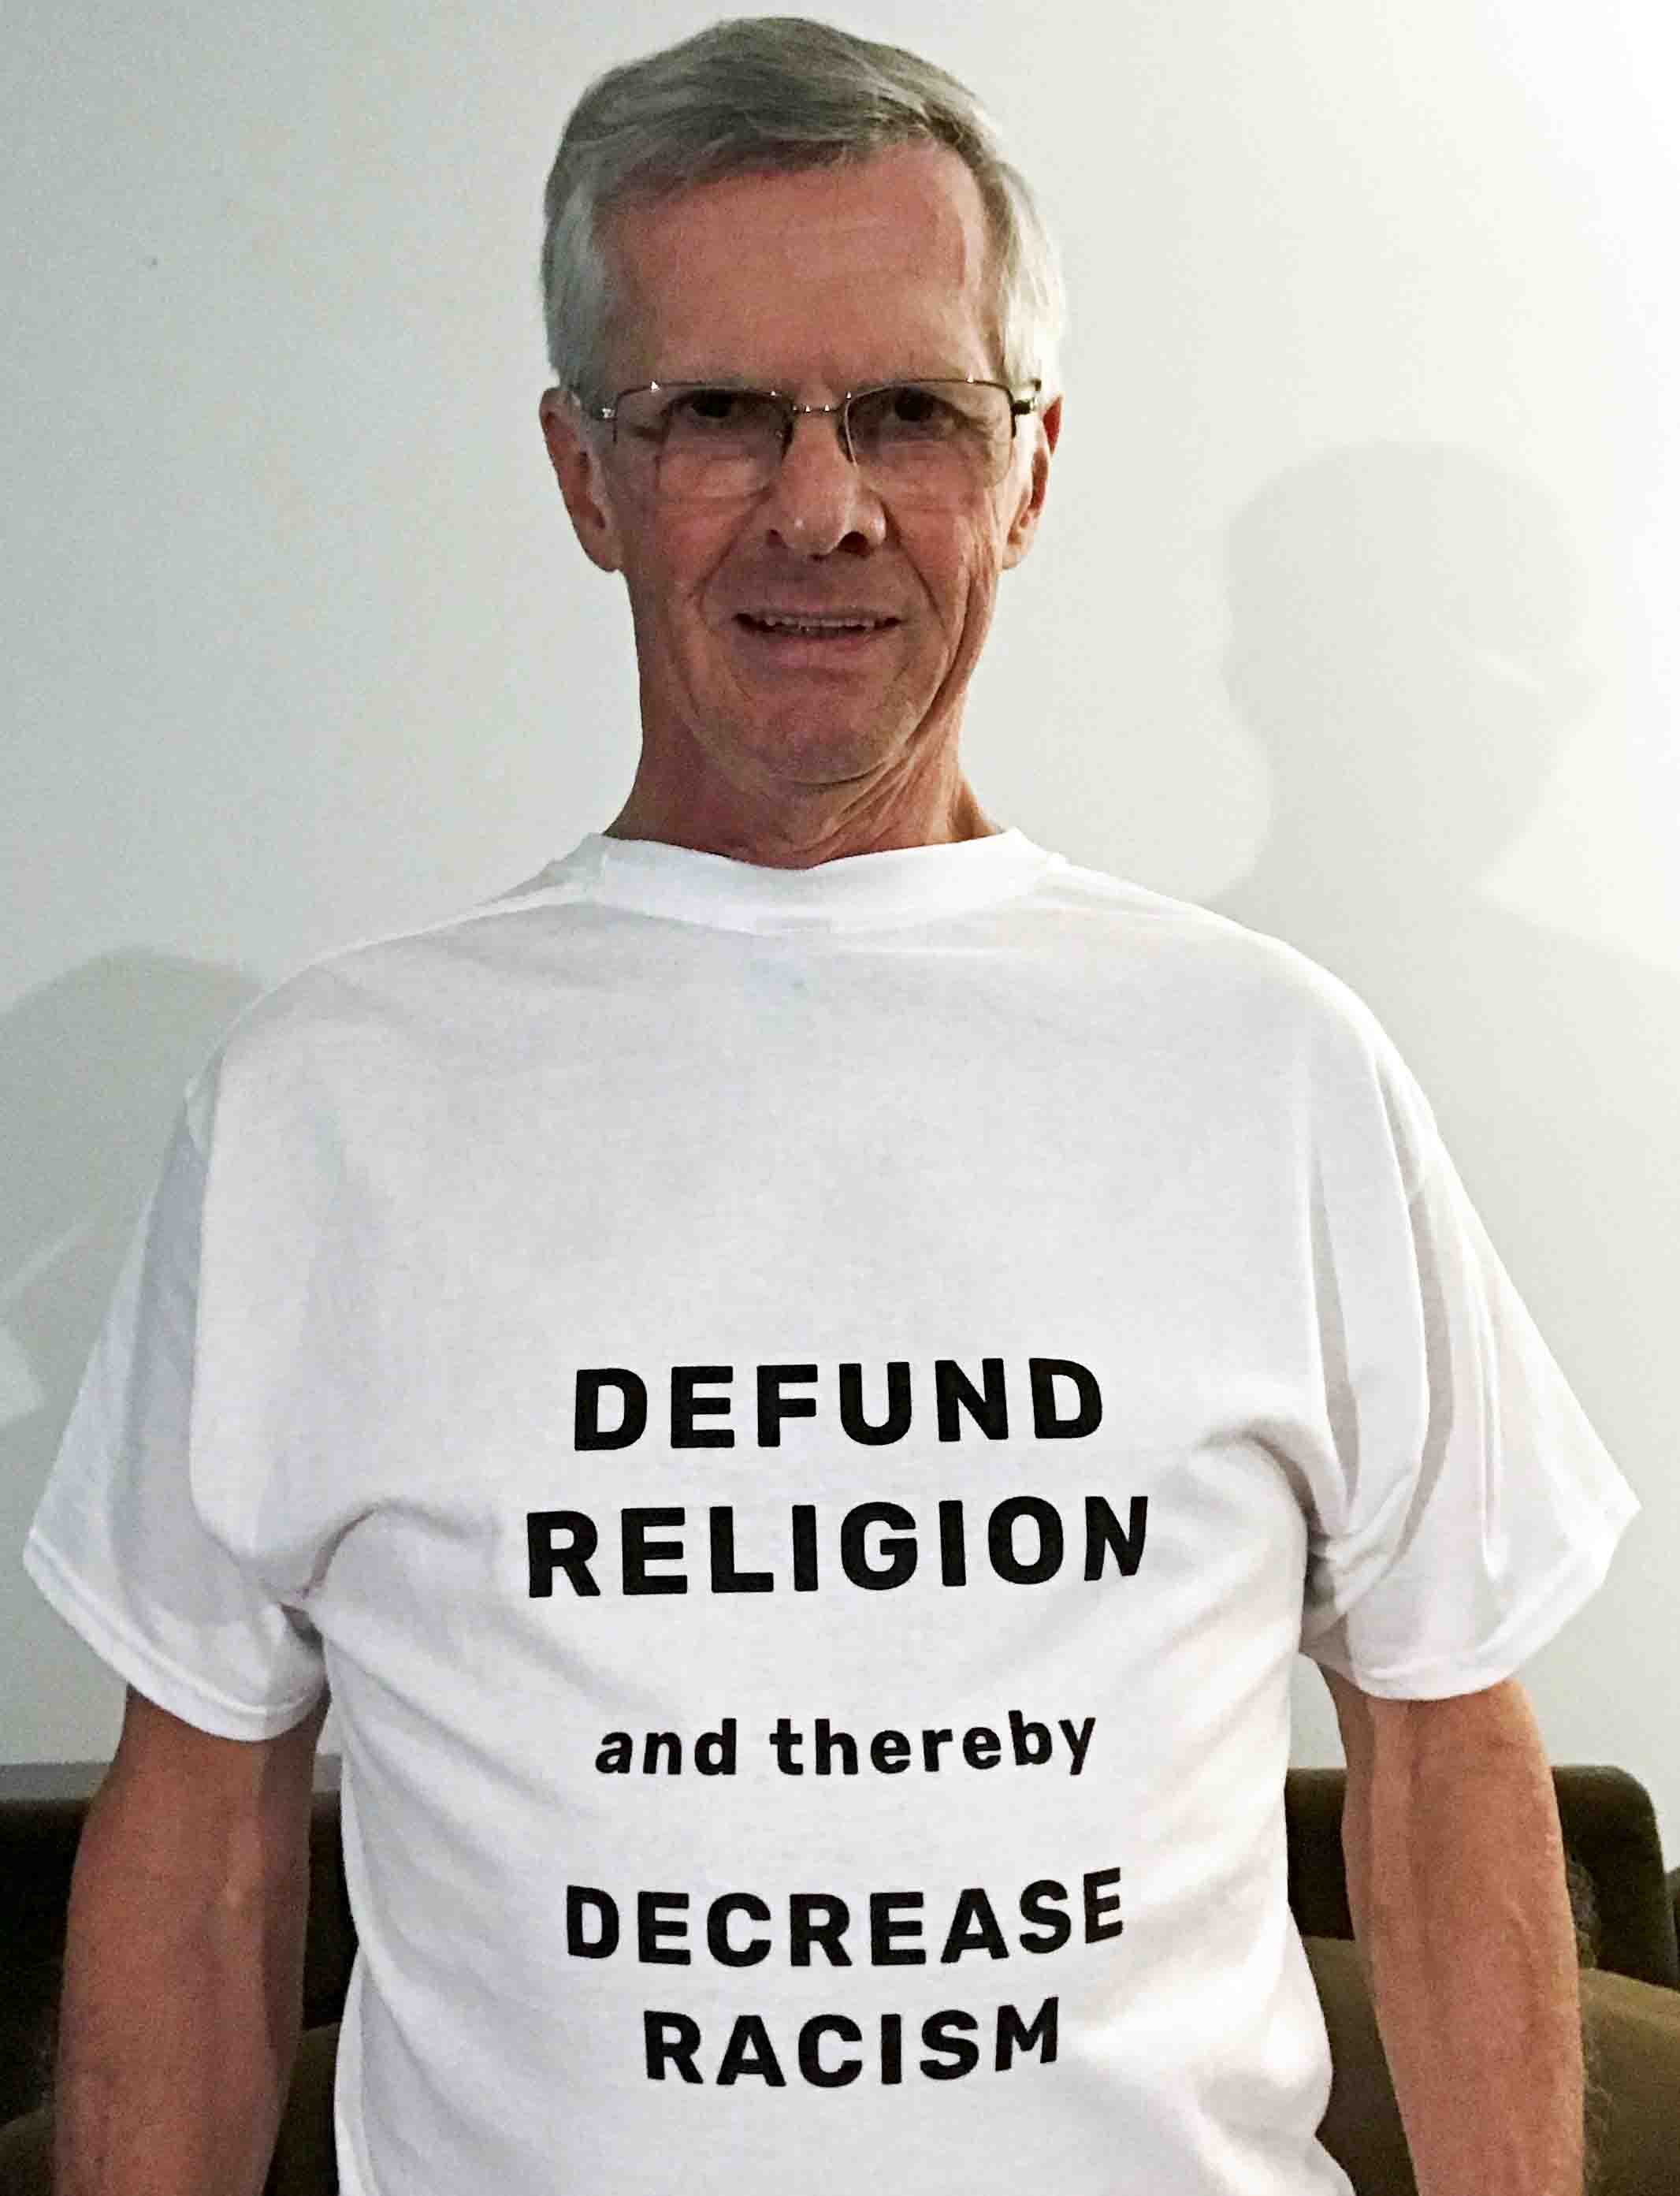 Darwin Bedford wearing his shirt that says 'DEFUND RELIGION and thereby DECREASE RACISM'